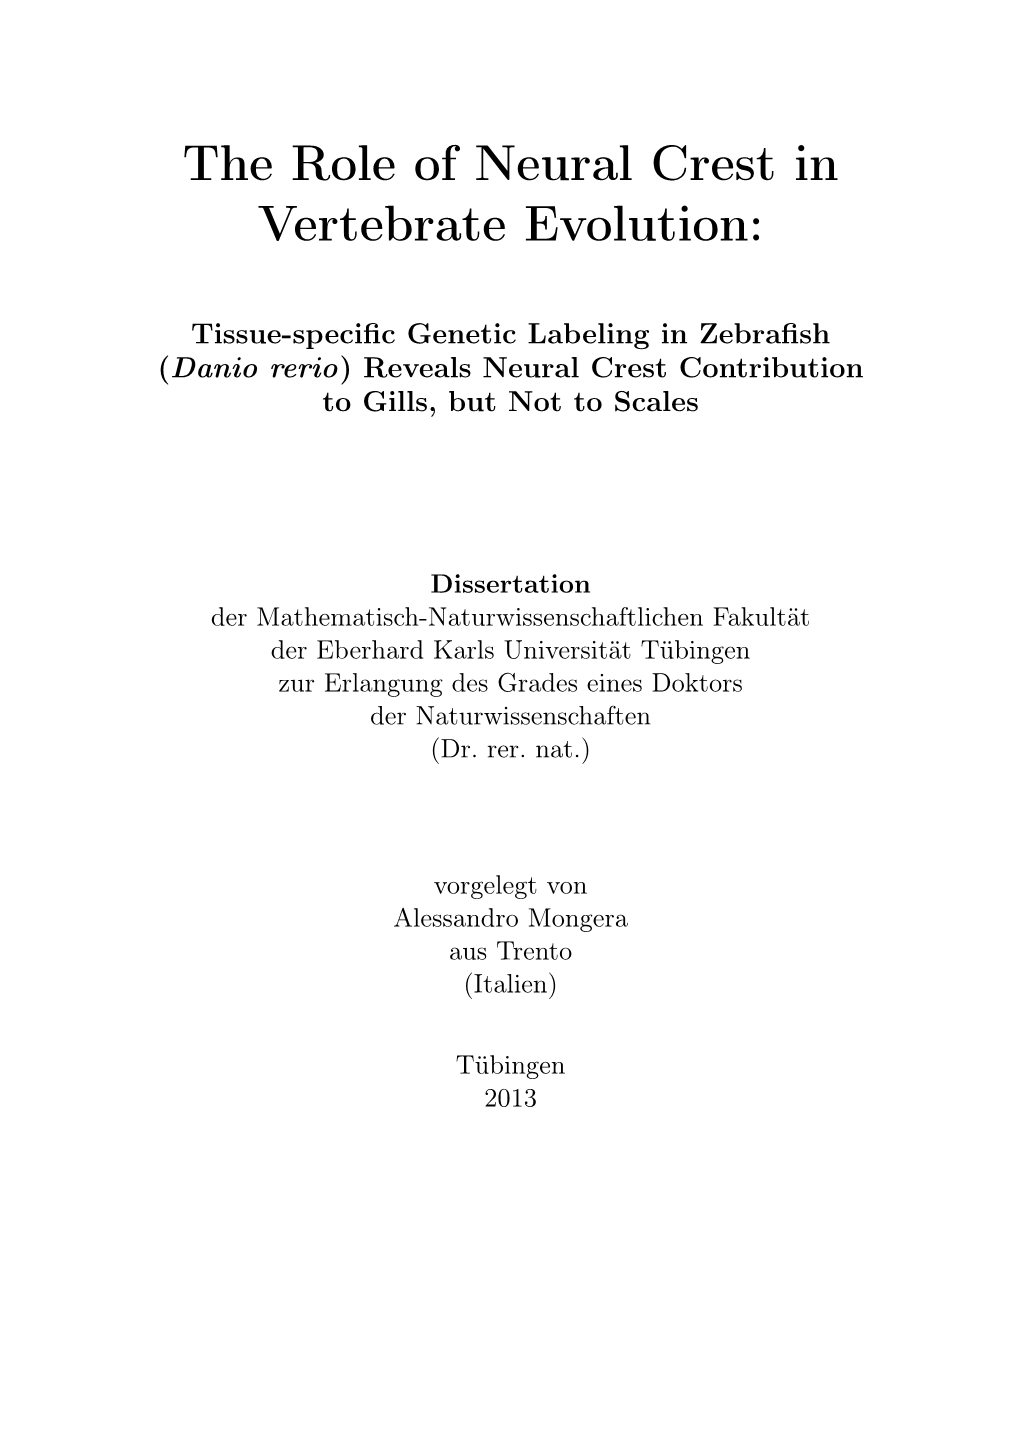 The Role of Neural Crest in Vertebrate Evolution